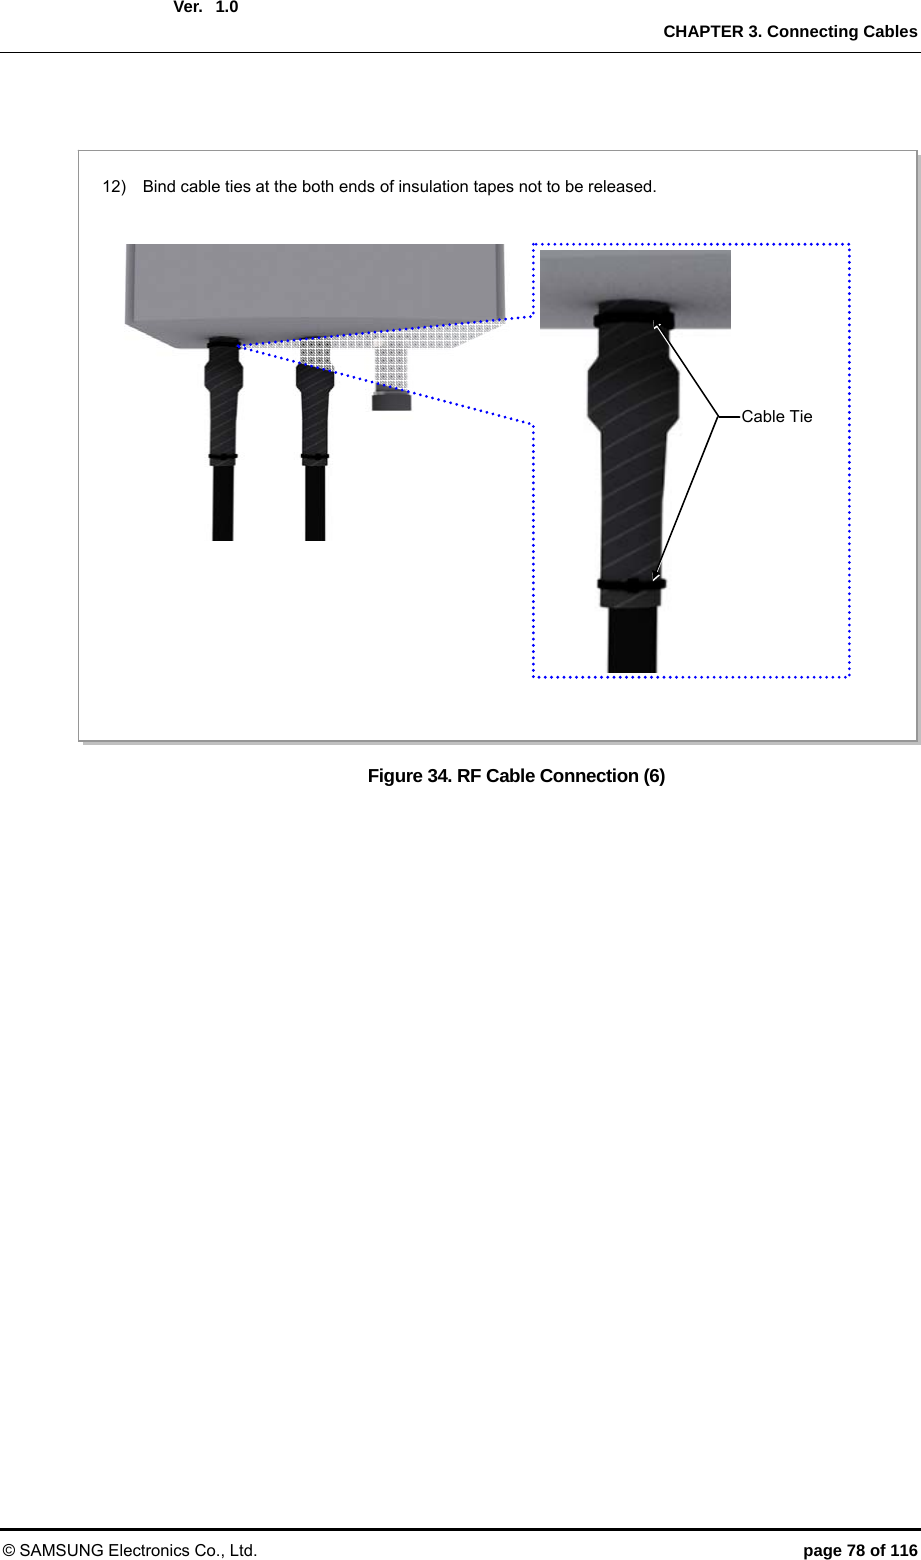  Ver.   CHAPTER 3. Connecting Cables © SAMSUNG Electronics Co., Ltd.  page 78 of 116 1.0 Figure 34. RF Cable Connection (6)   12)    Bind cable ties at the both ends of insulation tapes not to be released. Cable Tie 